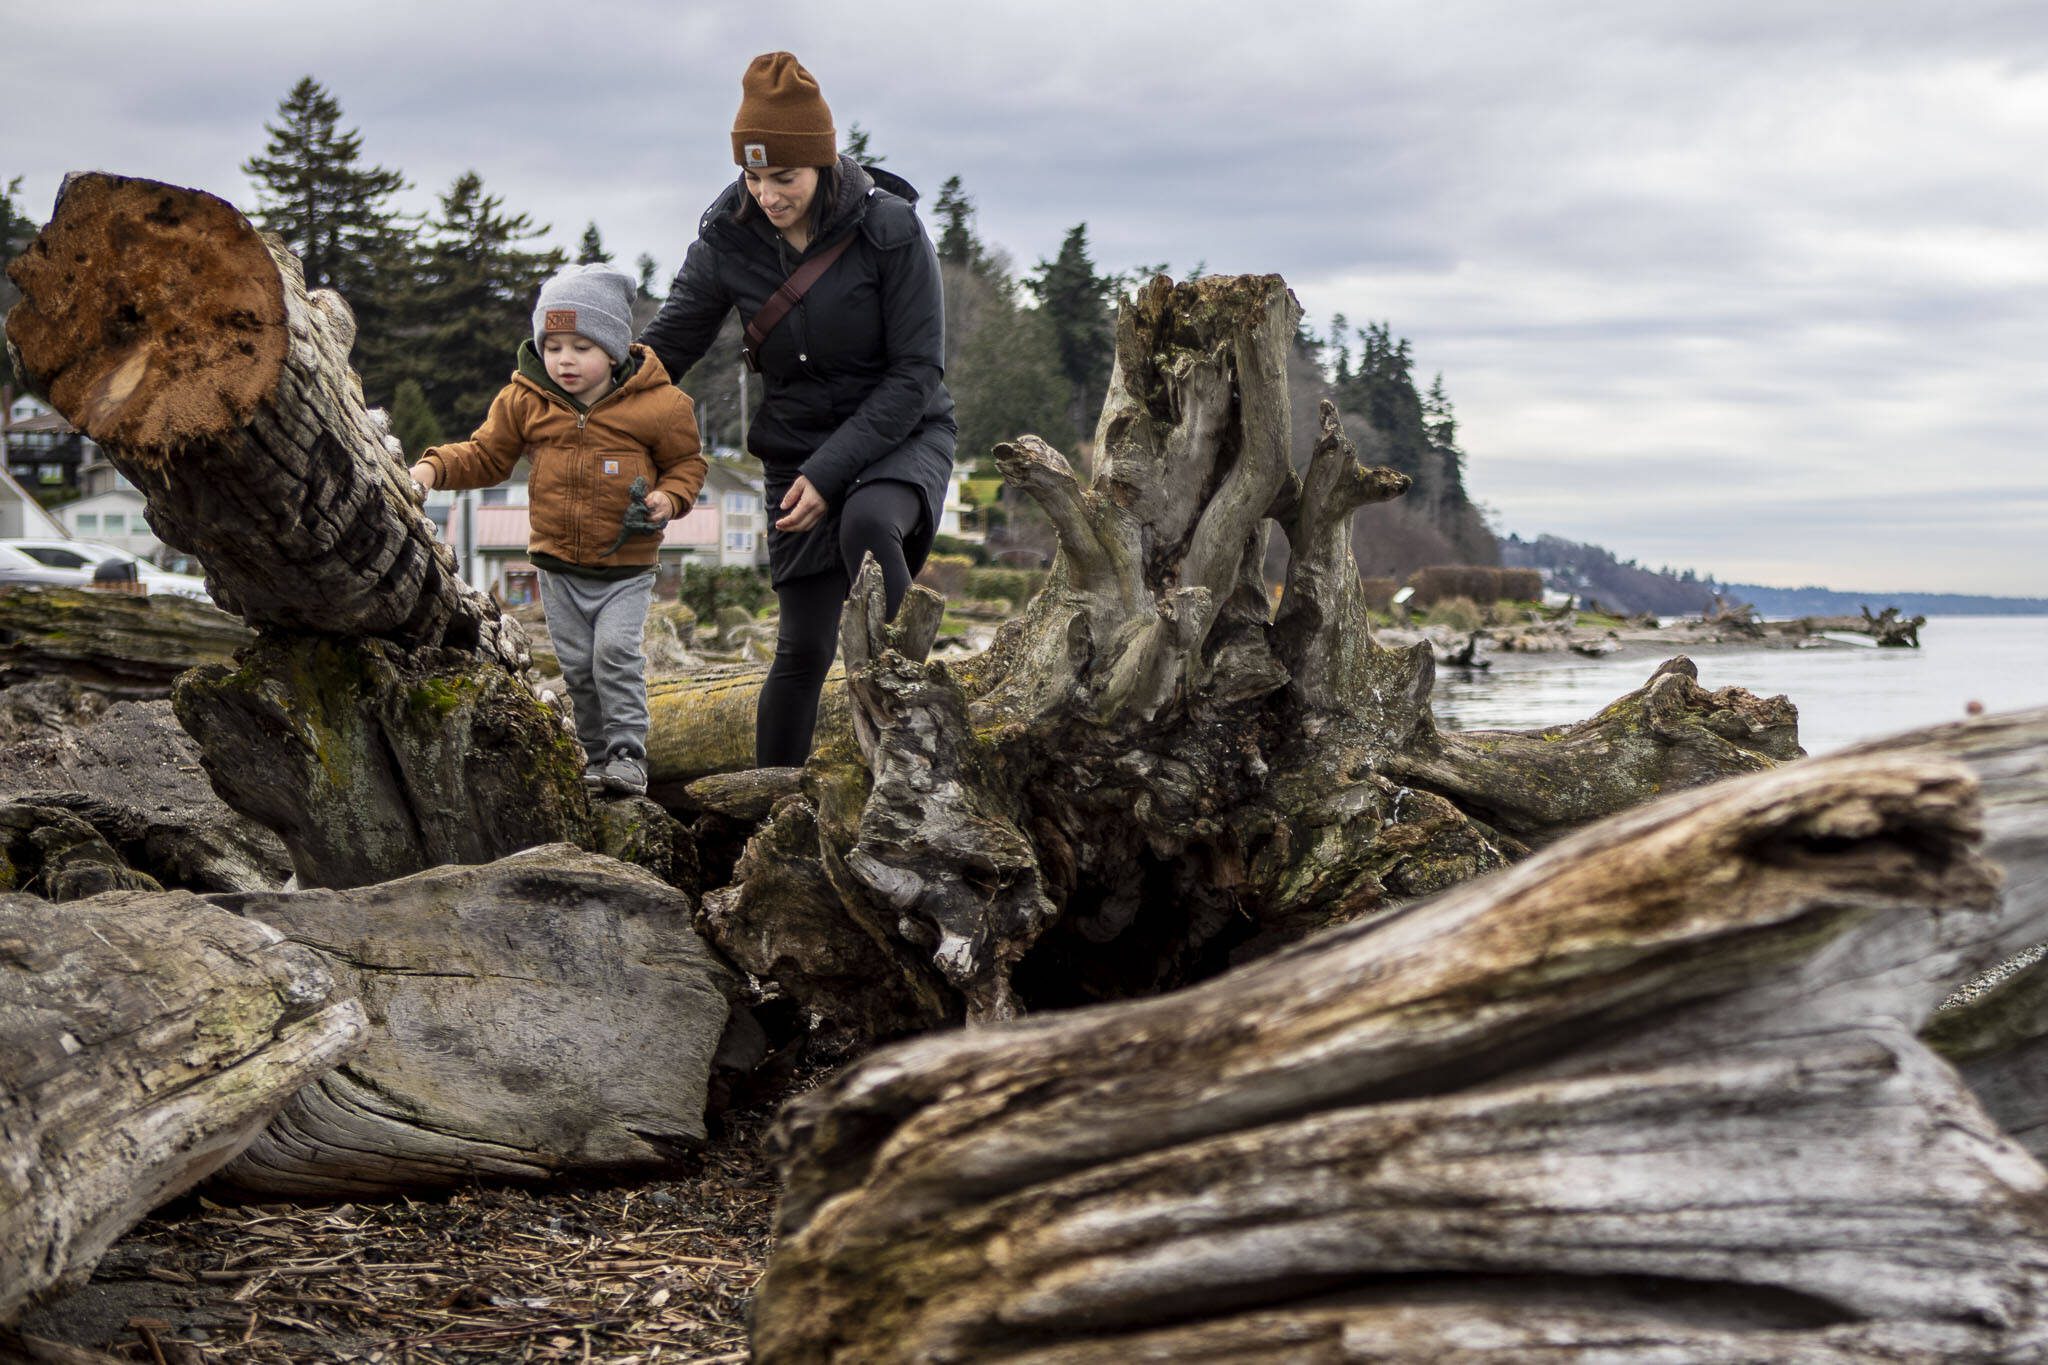 Boone Bisbey, 2, and Hunnika Bisbey, 39, walk along the beach and driftwood at Lighthouse Park in Mukilteo, Washington, on Wednesday, Jan. 3, 2024. (Annie Barker / The Herald)